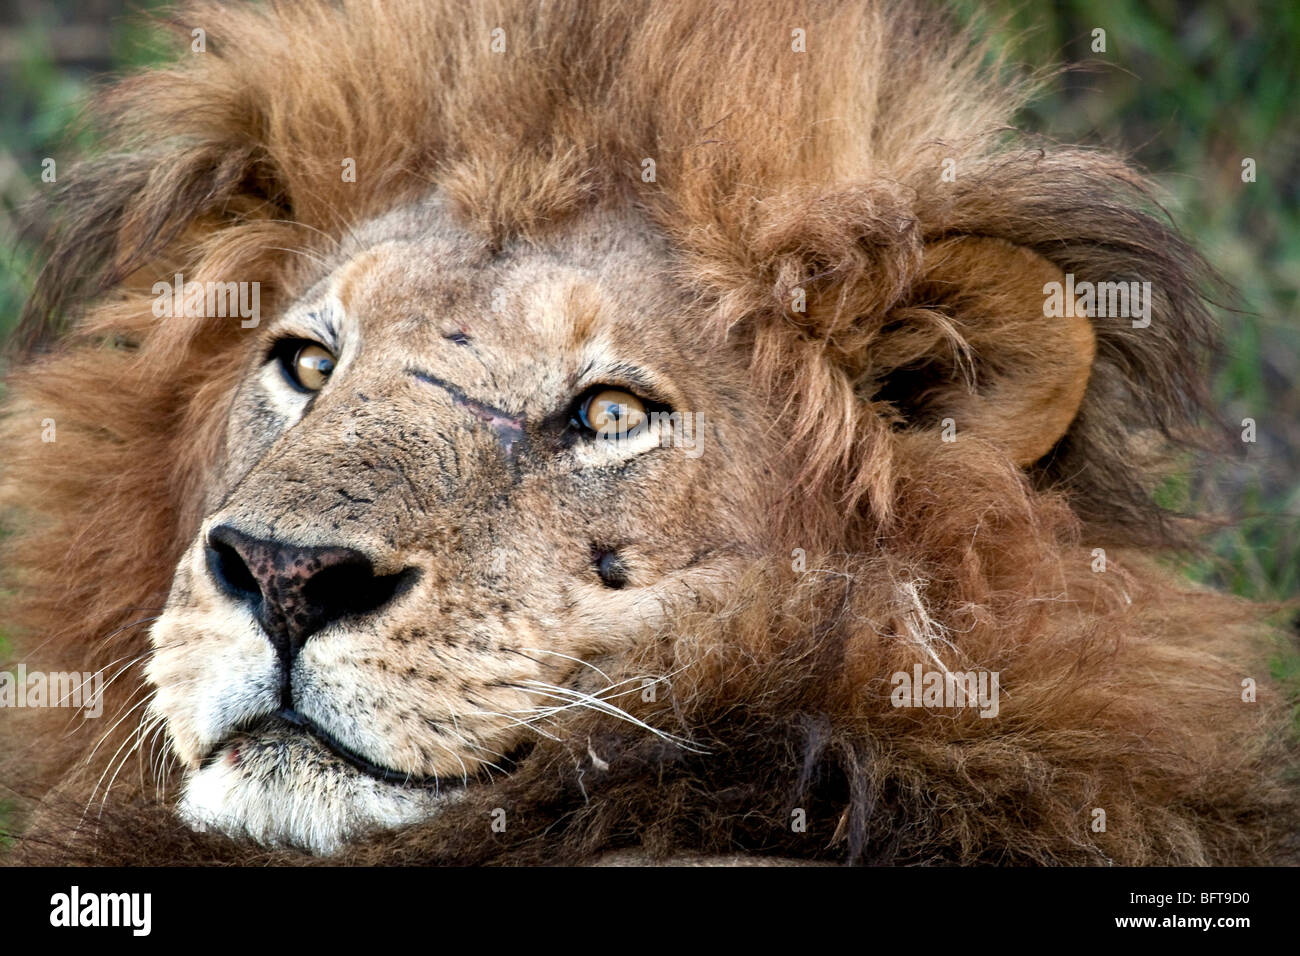 Close-up of male lion showing scared face and bright piercing eyes Stock Photo